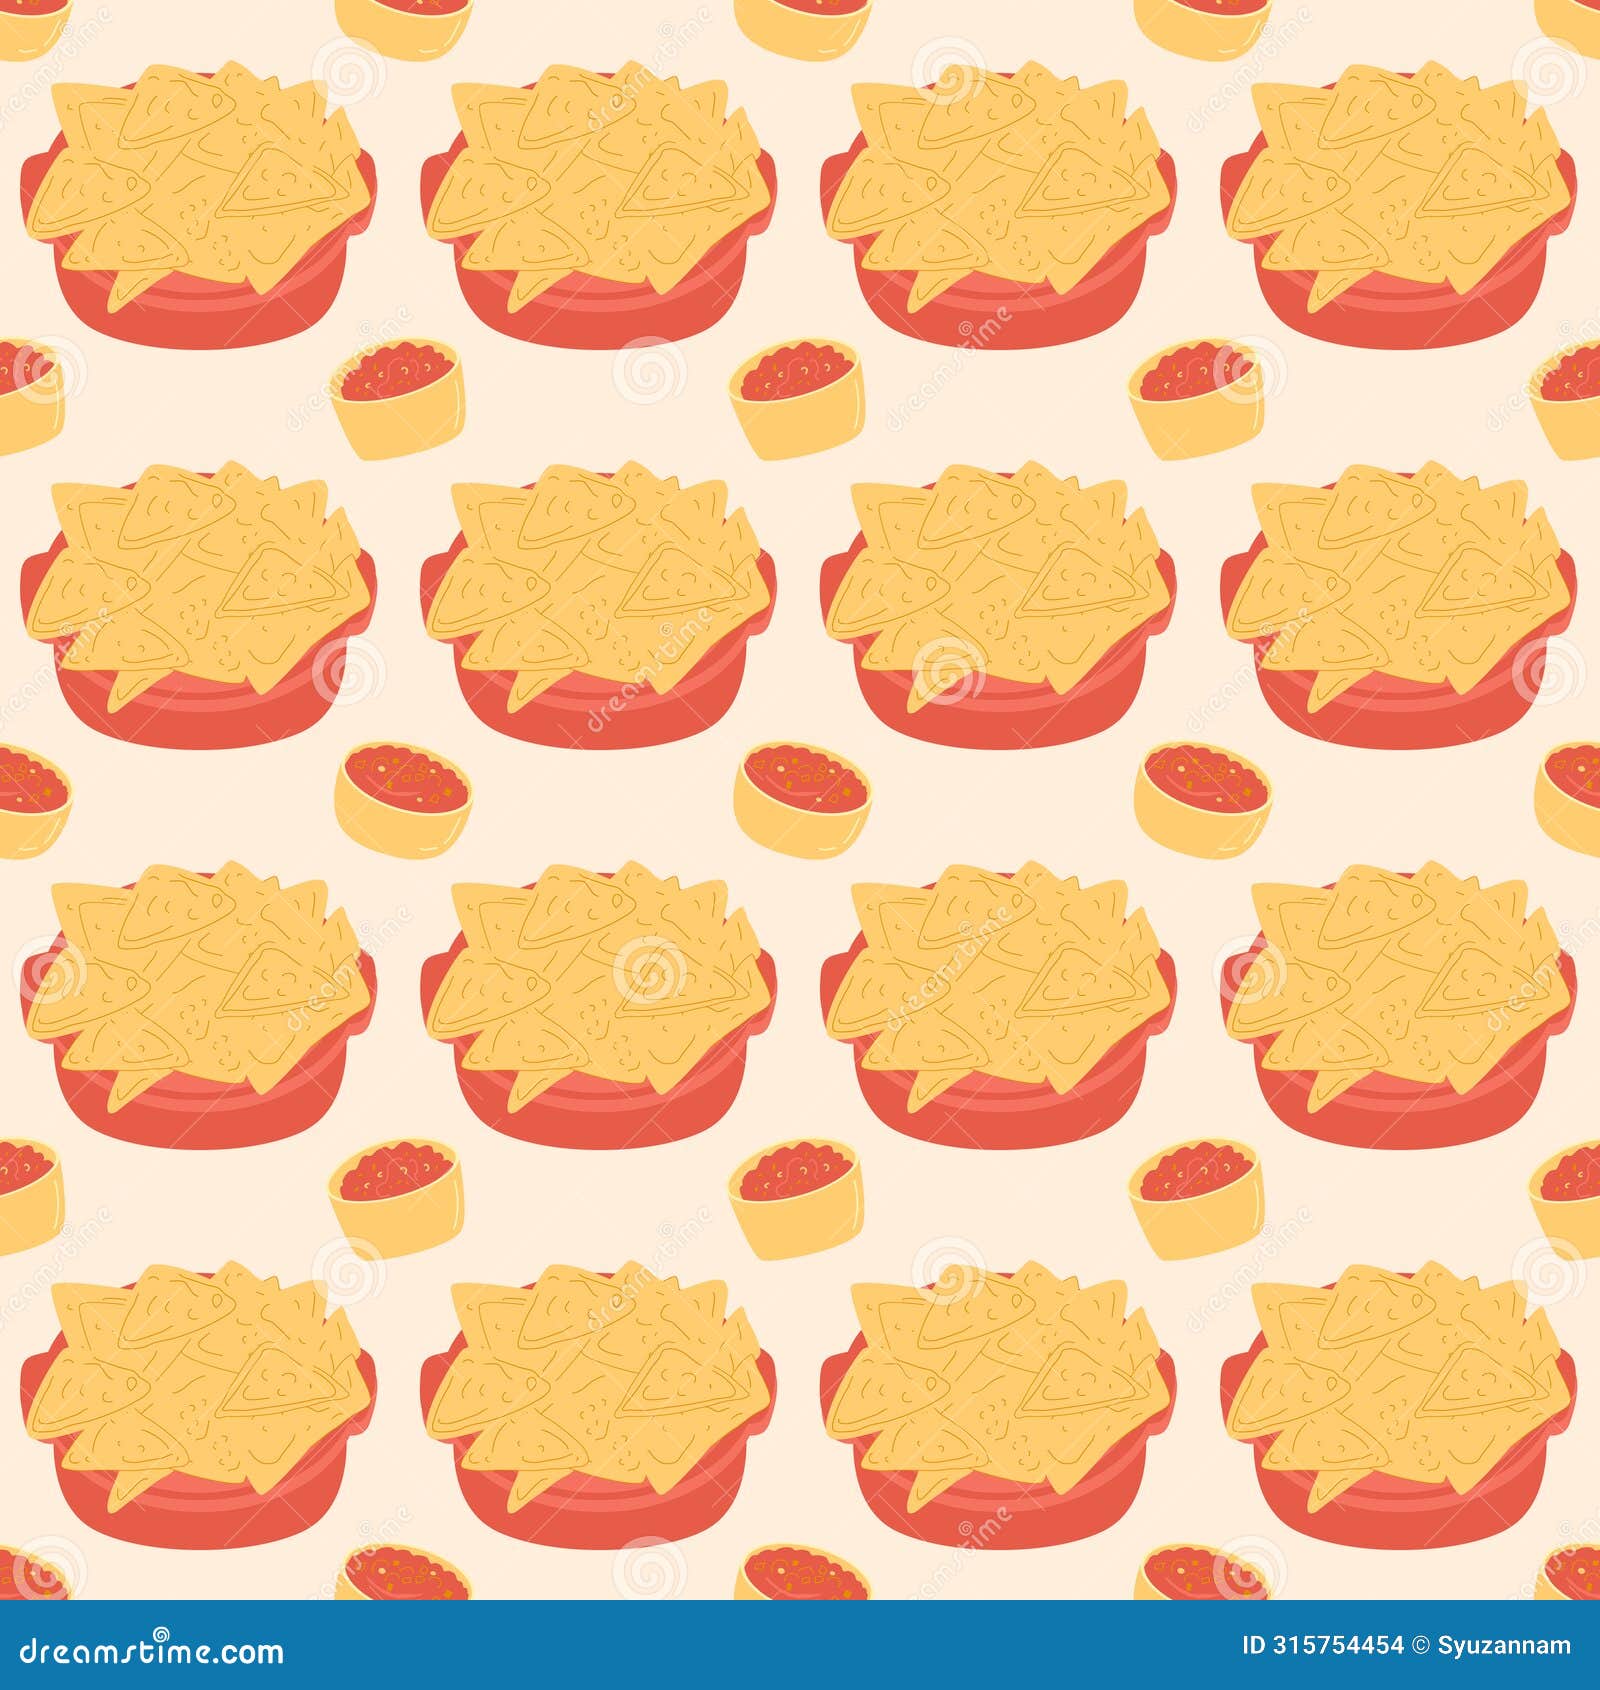 nachos with sauce seamless pattern. mexican fast food with salsa rojo red repeat background. cheese tortilla chips with gravy